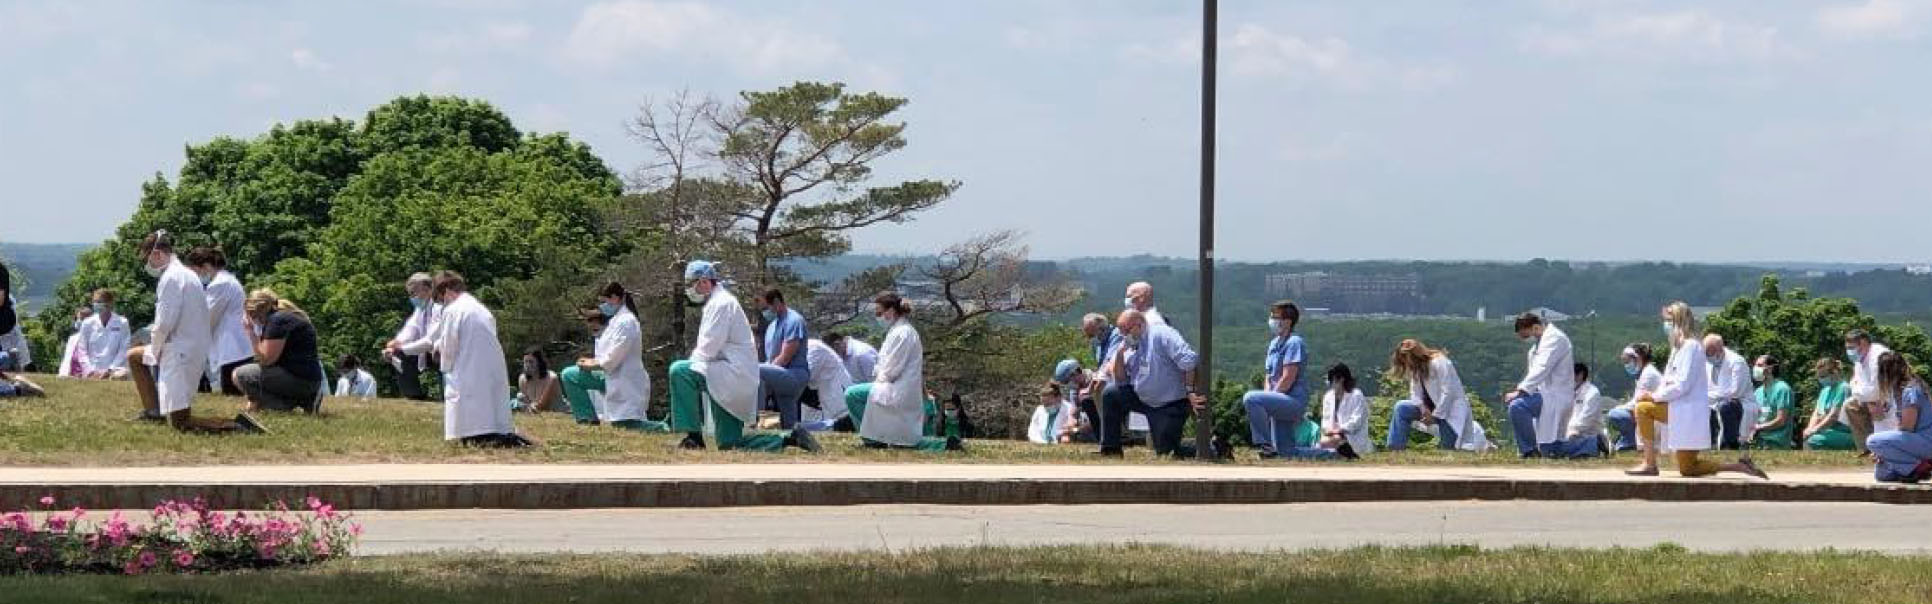 MaineHealth physicians and residents kneel in support of the Black Lives Matter movement at Maine Medical Center.